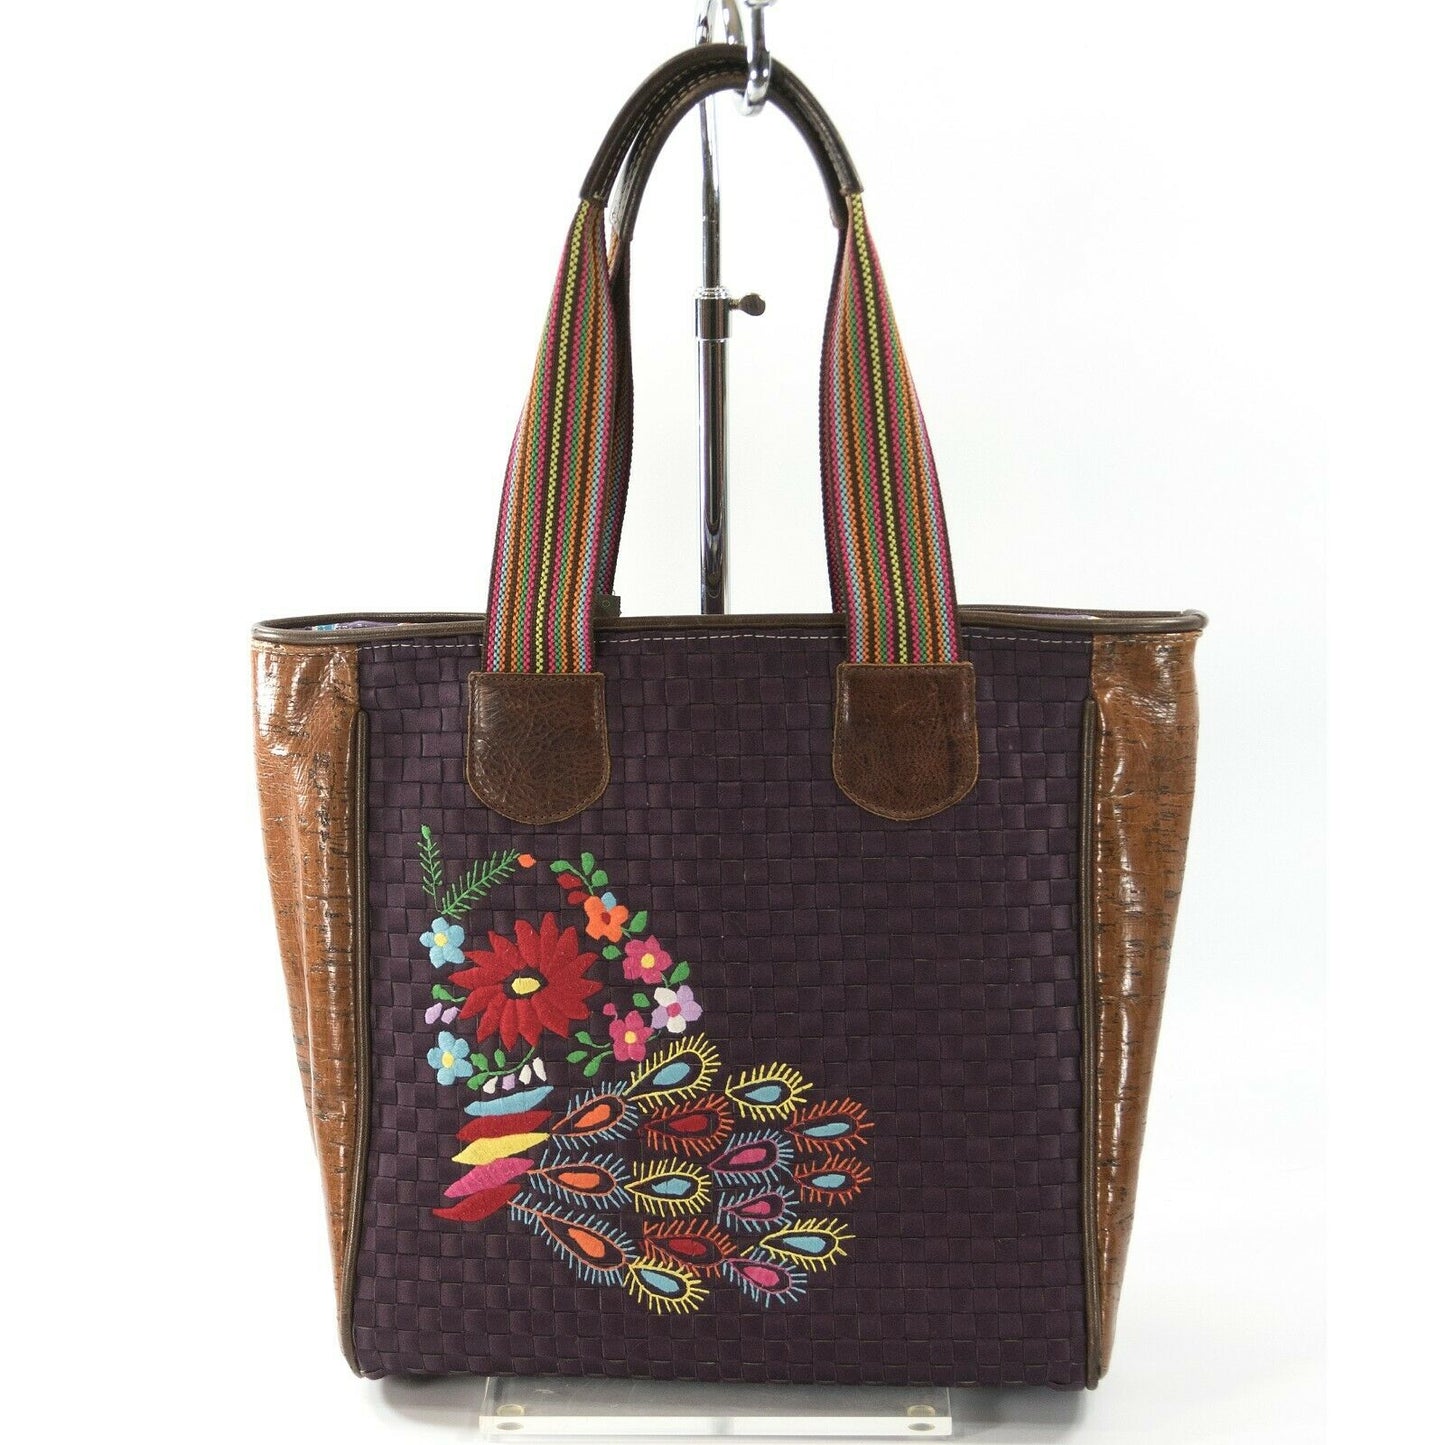 Consuela Austin Purple Woven Twill Floral Embroidered Leather Large Tote Bag NWT